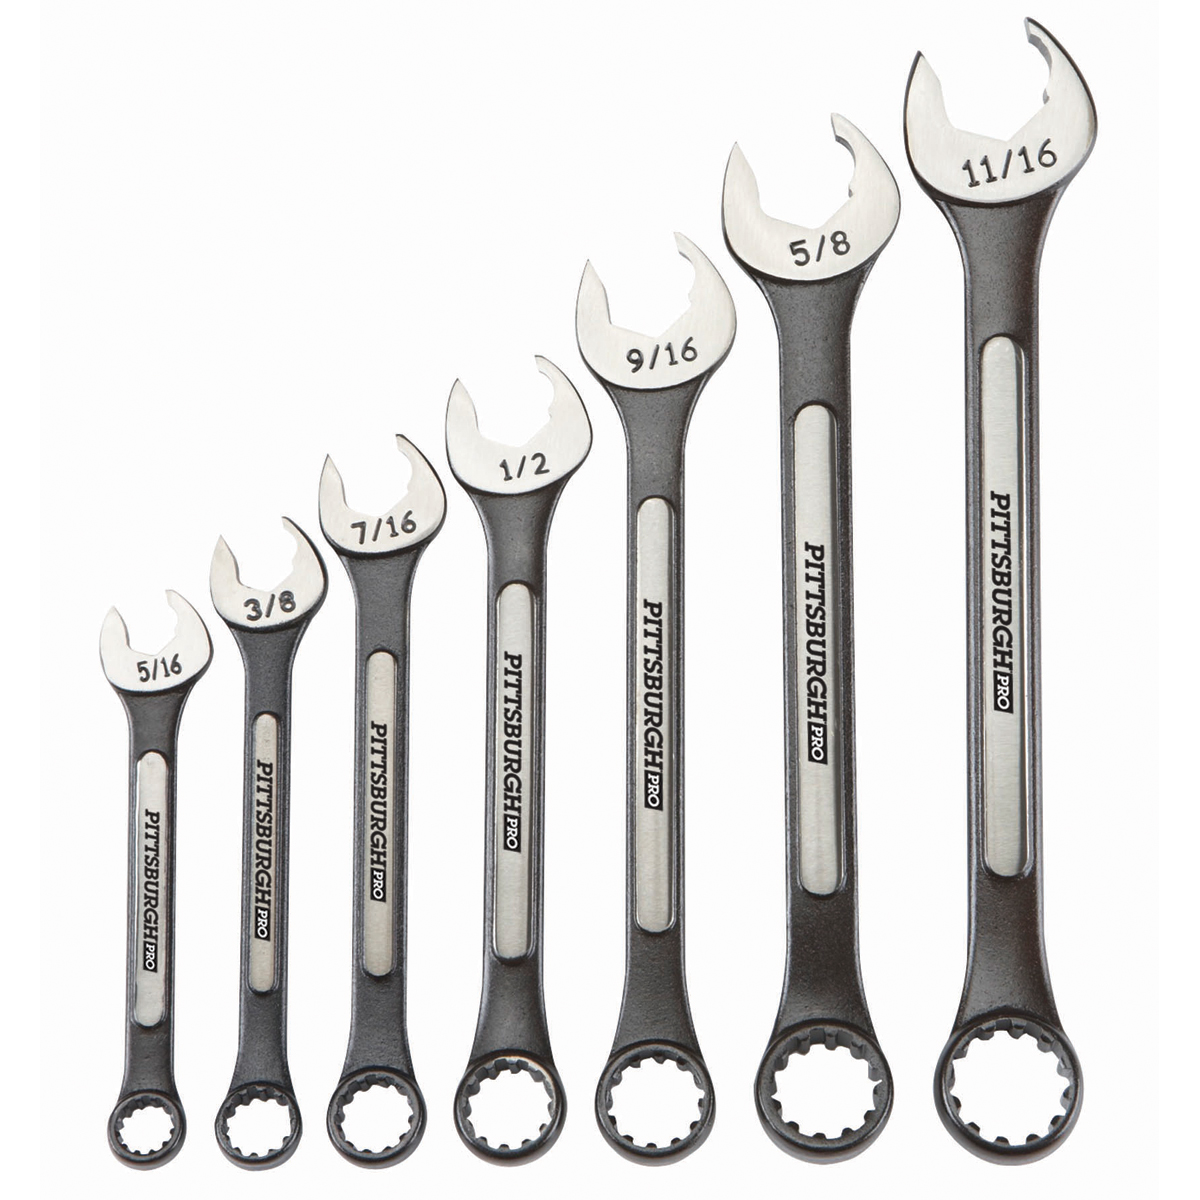 PITTSBURGH SAE Universal Combination Wrench Set 7 Pc. - Item 69330